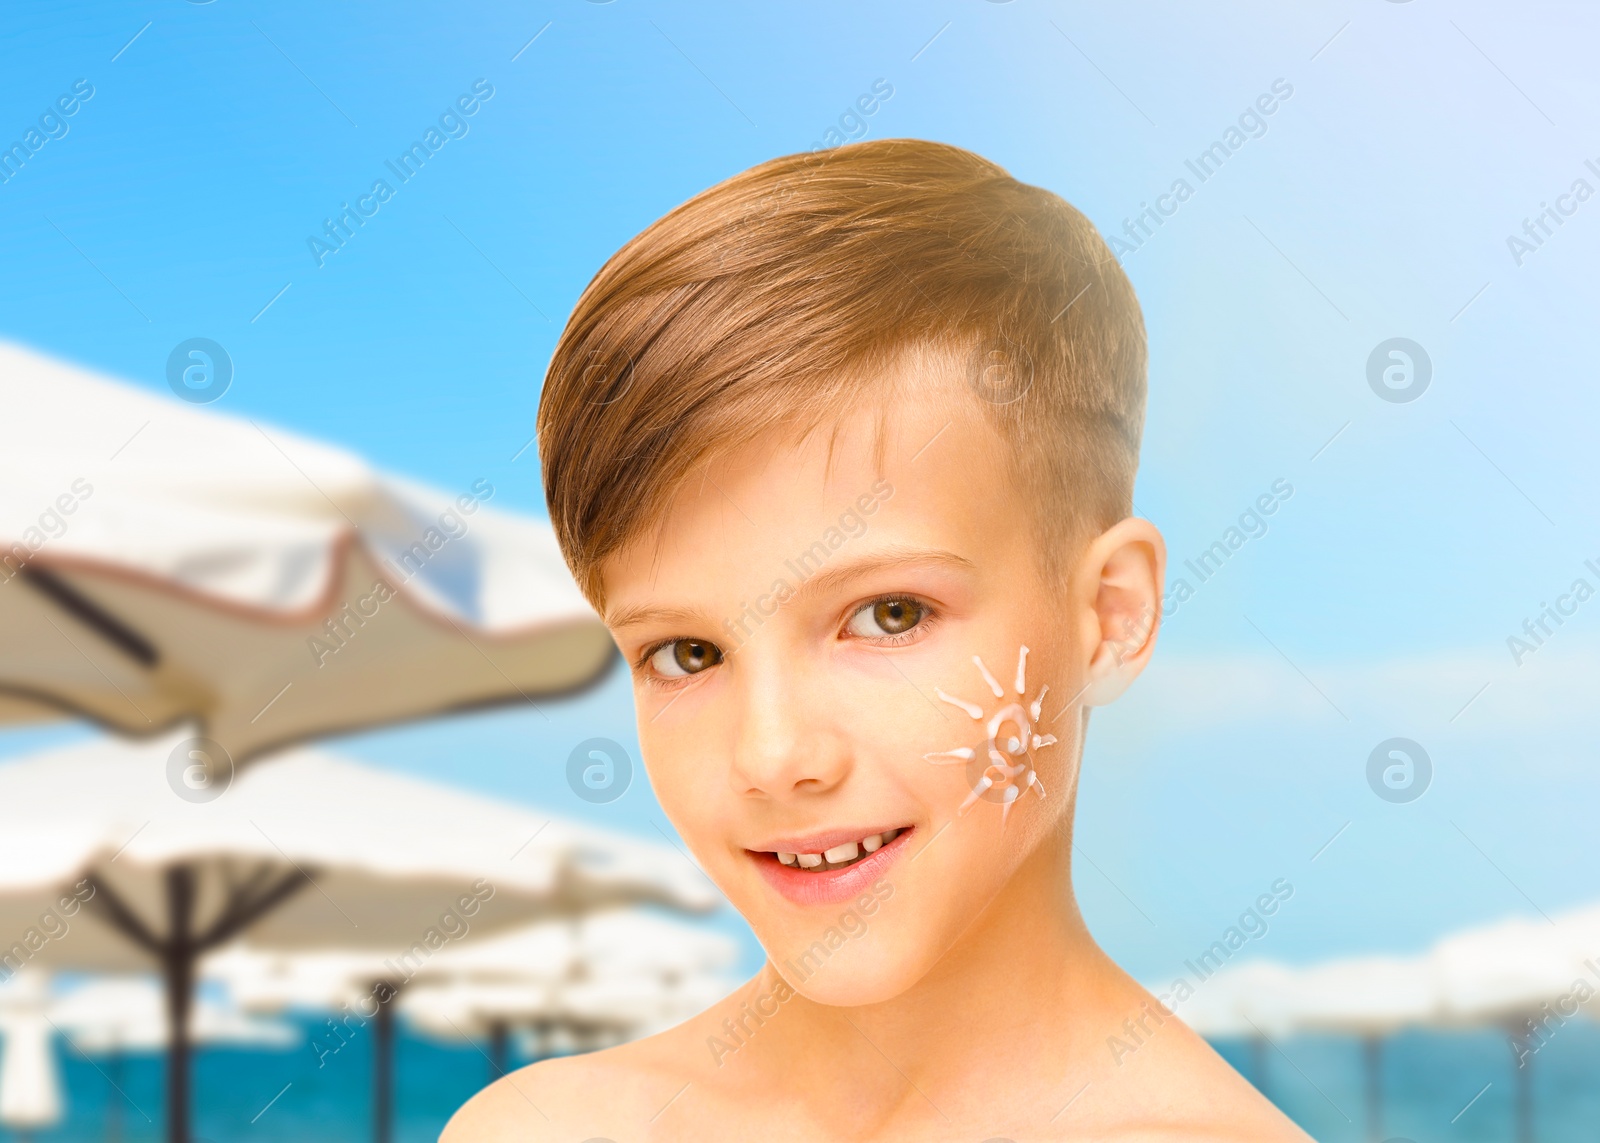 Image of Sun protection. Boy with sunblock on his face on beach